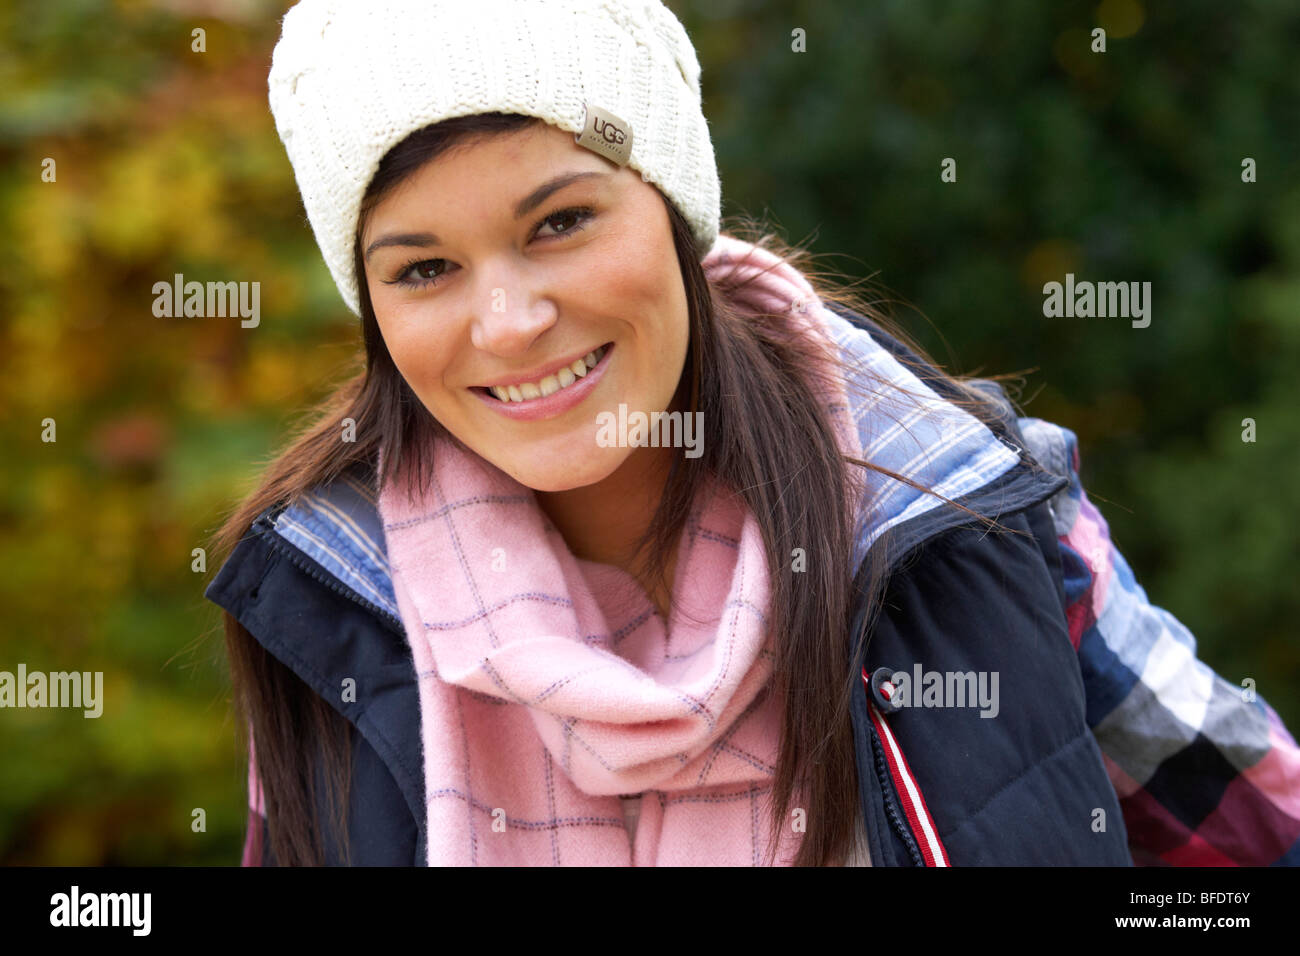 Girl wearing hat and scarf Stock Photo